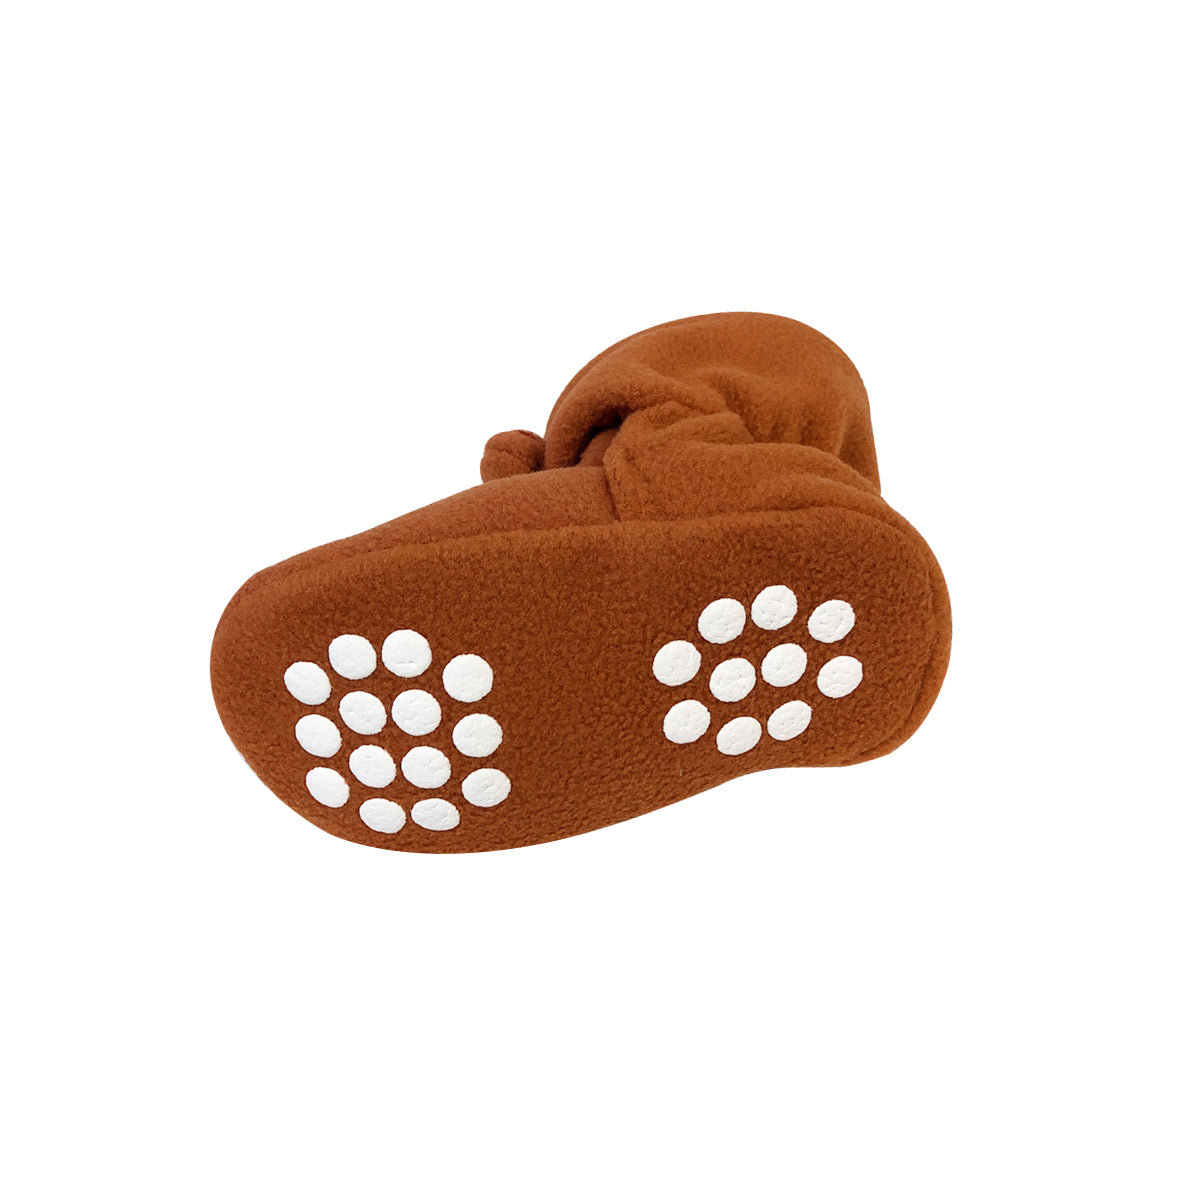 Wrapables Fleece Baby Booties with Anti-Skid Bottoms